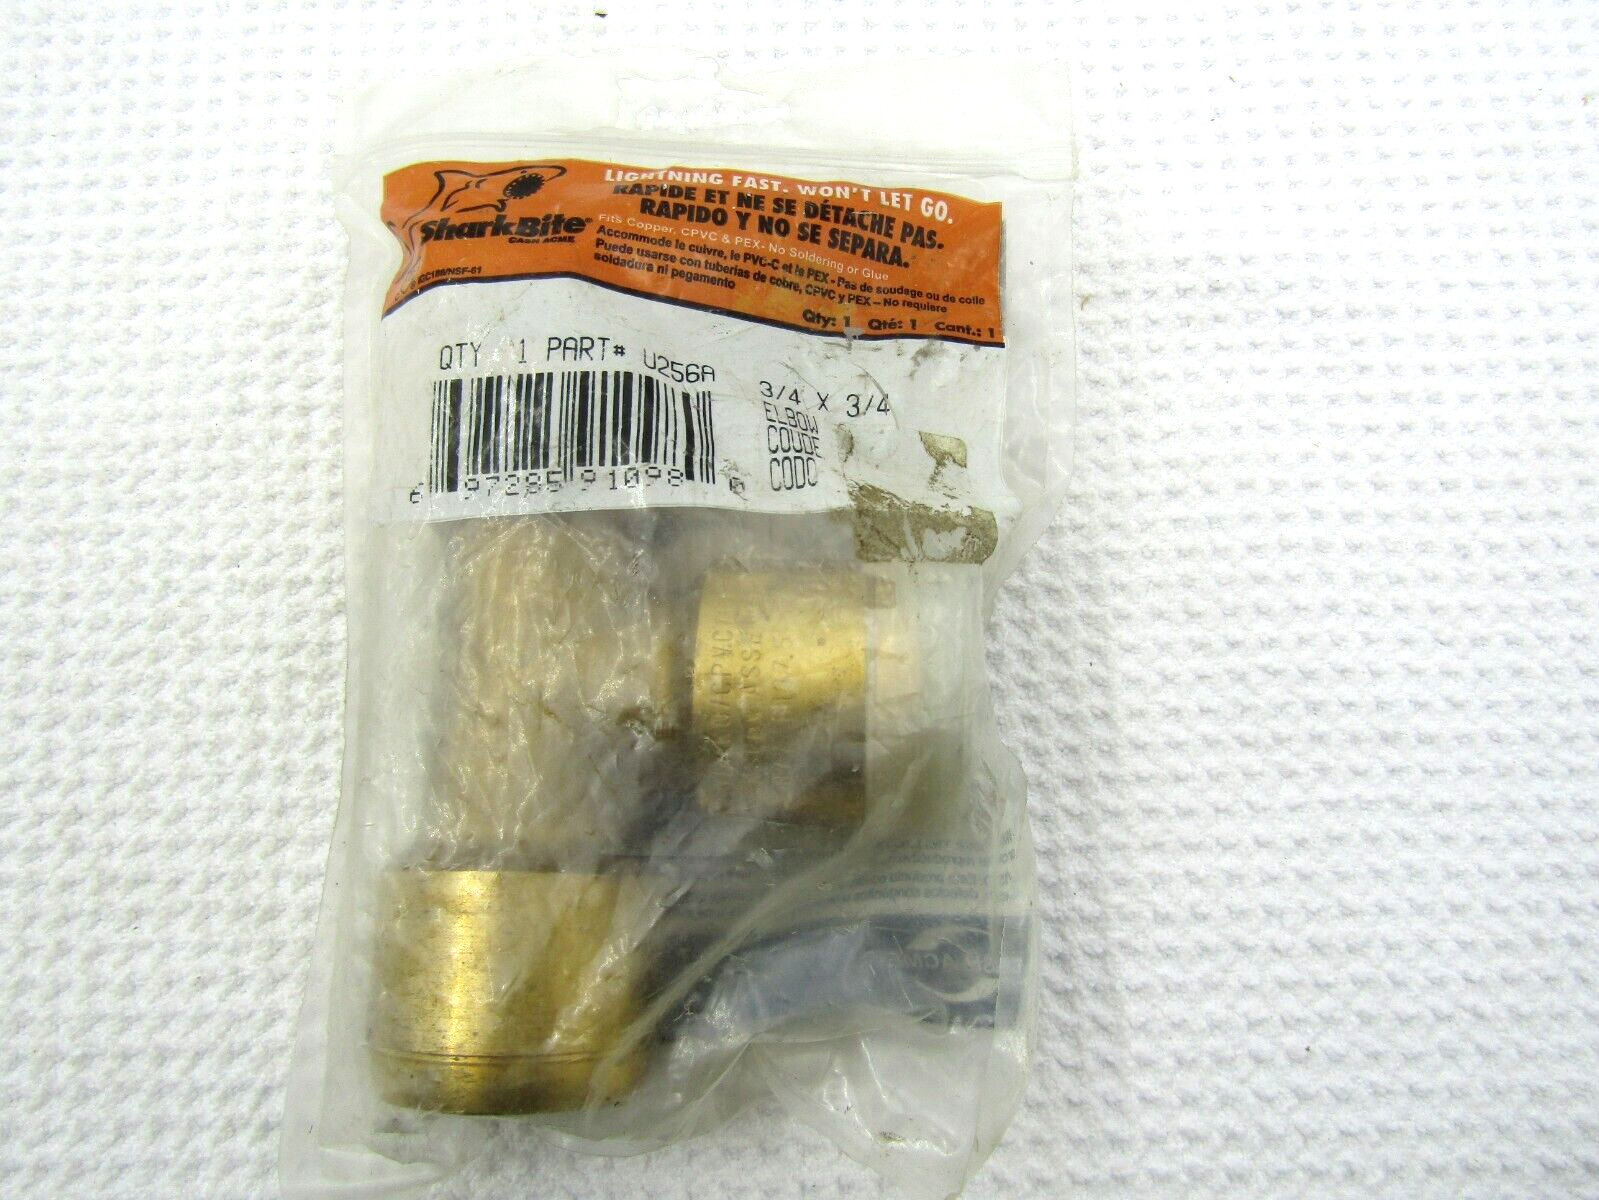 SHARKBITE U256A BRASS ELBOW: 3/4 x 3/4″ U256A, PUSH-TO-CONNECT FITTING (NEW)